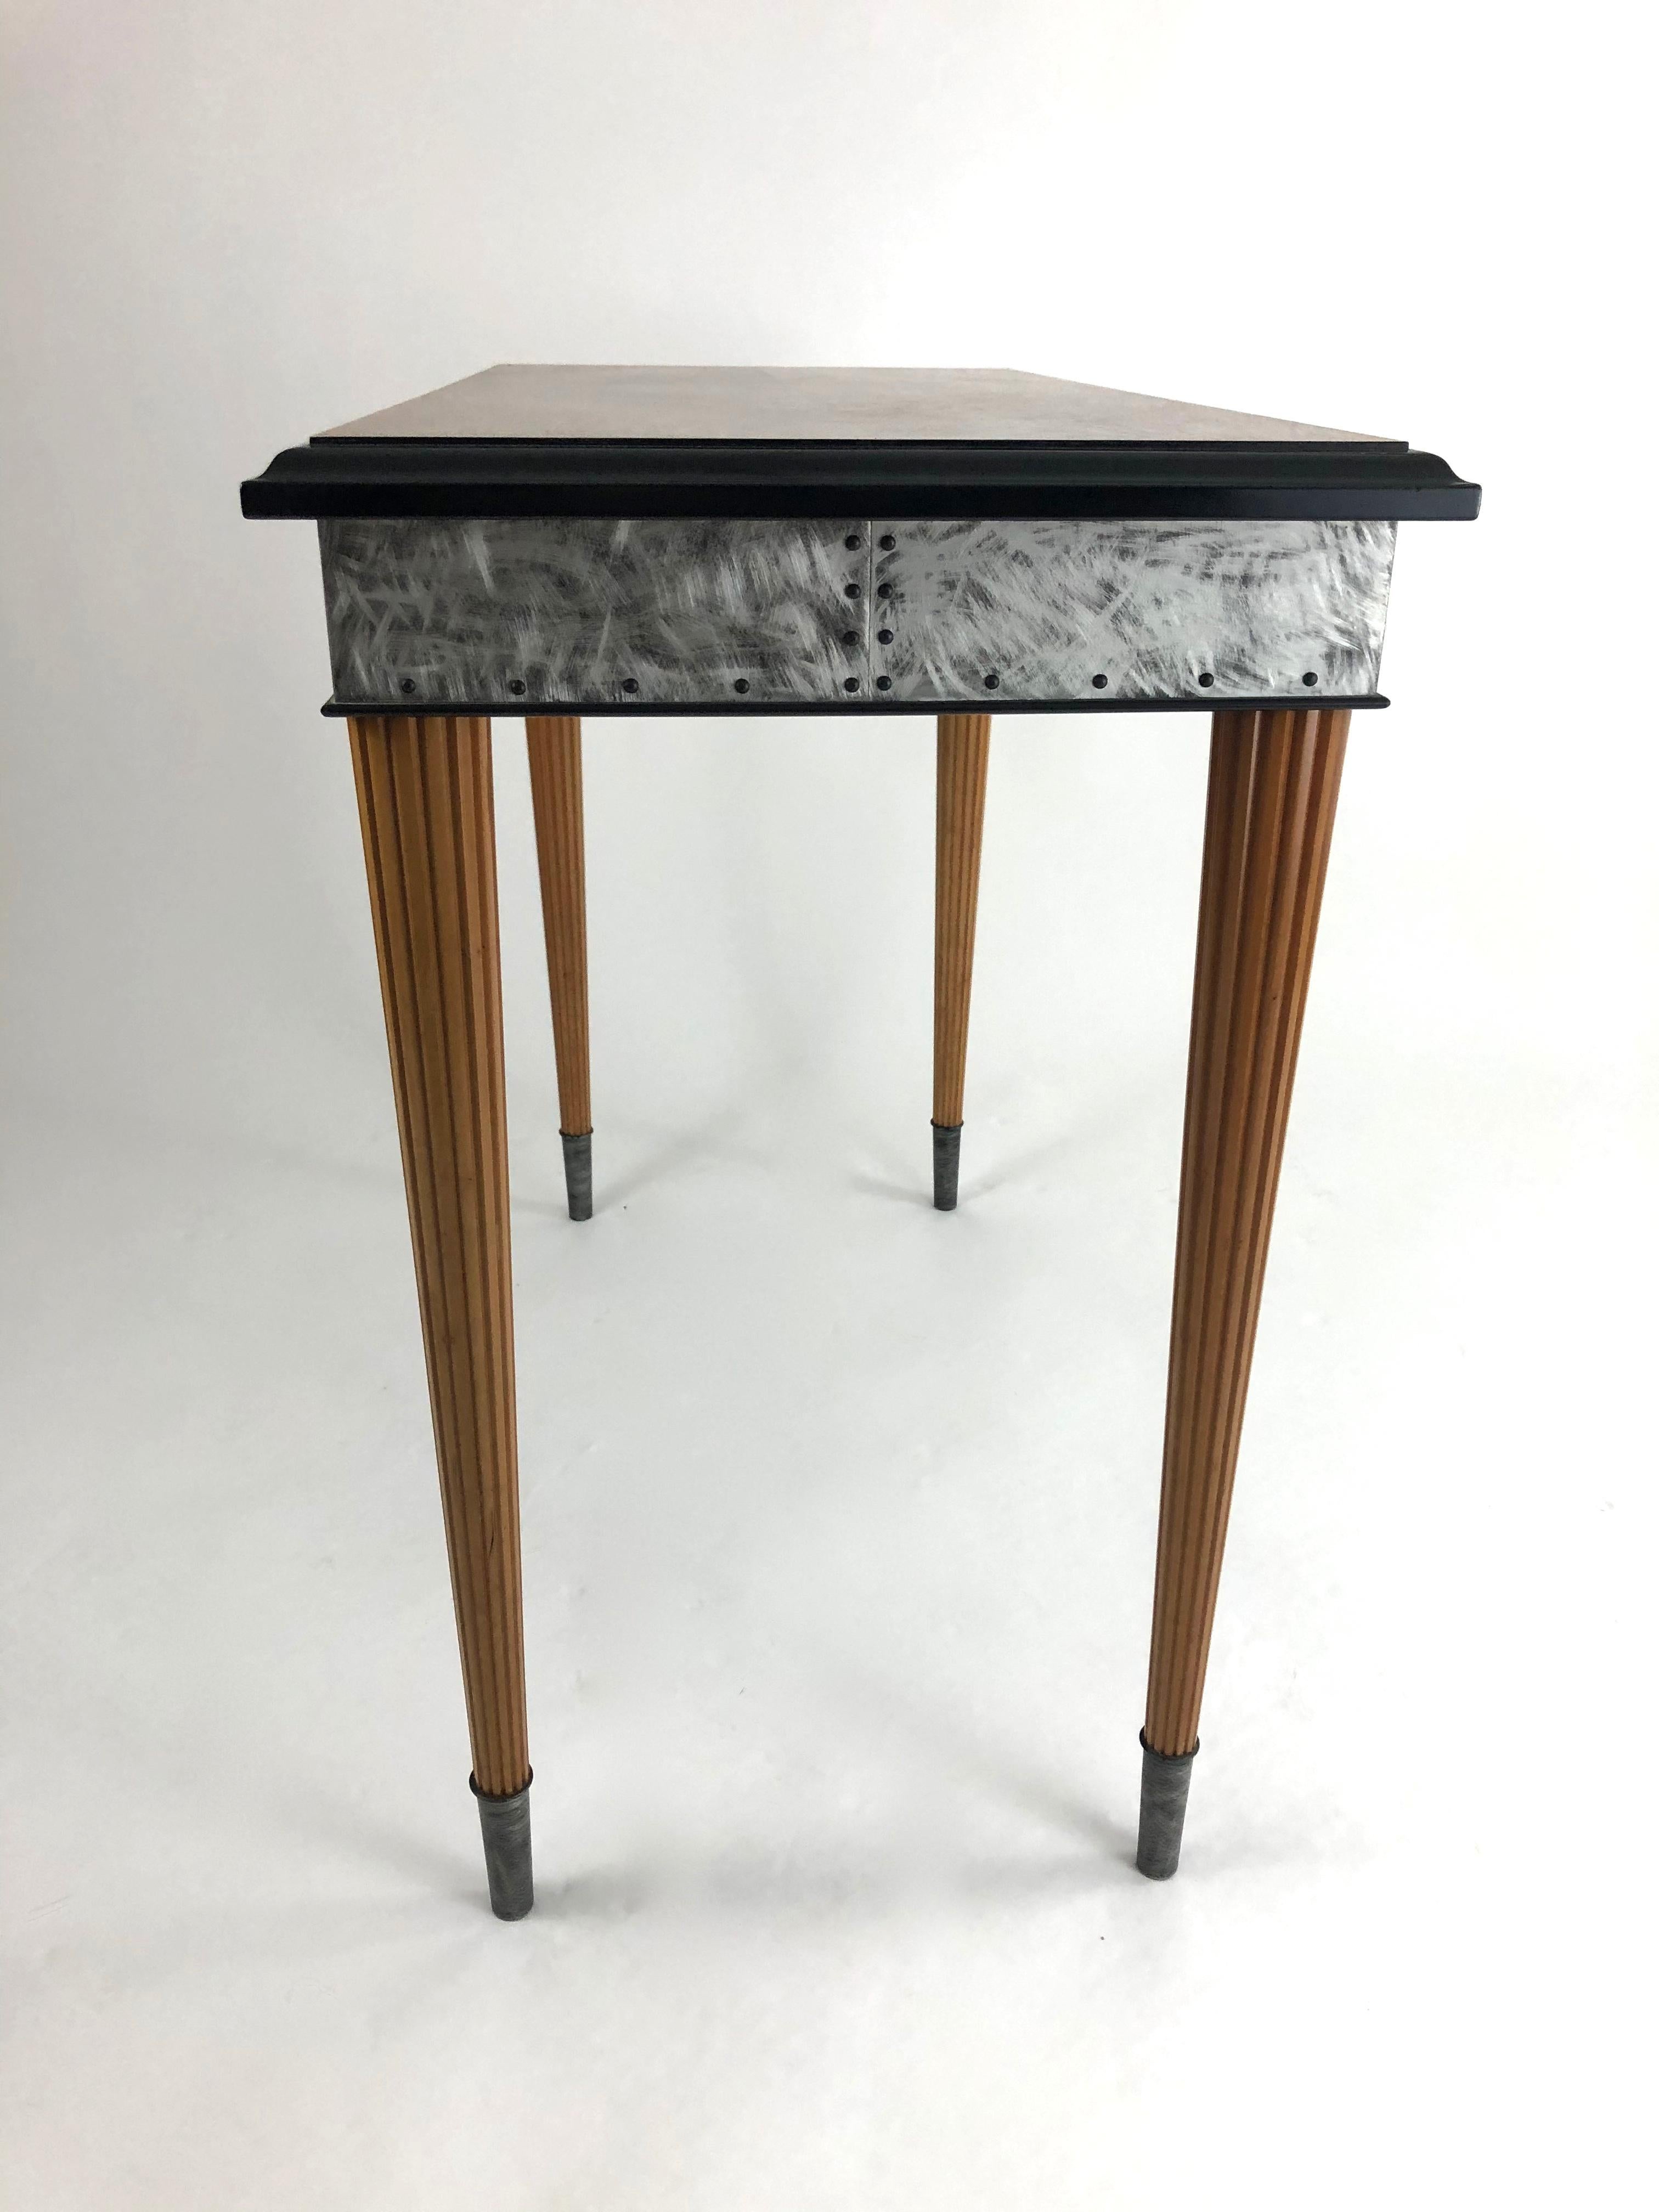 A fine quality studio furniture console table by American artist, Rick Wrigley (please see biography below). The rectangular top is in richly figured amboyna veneer surrounded by an ebonized cherry ogee moulded edge, over a patinated aluminum frieze